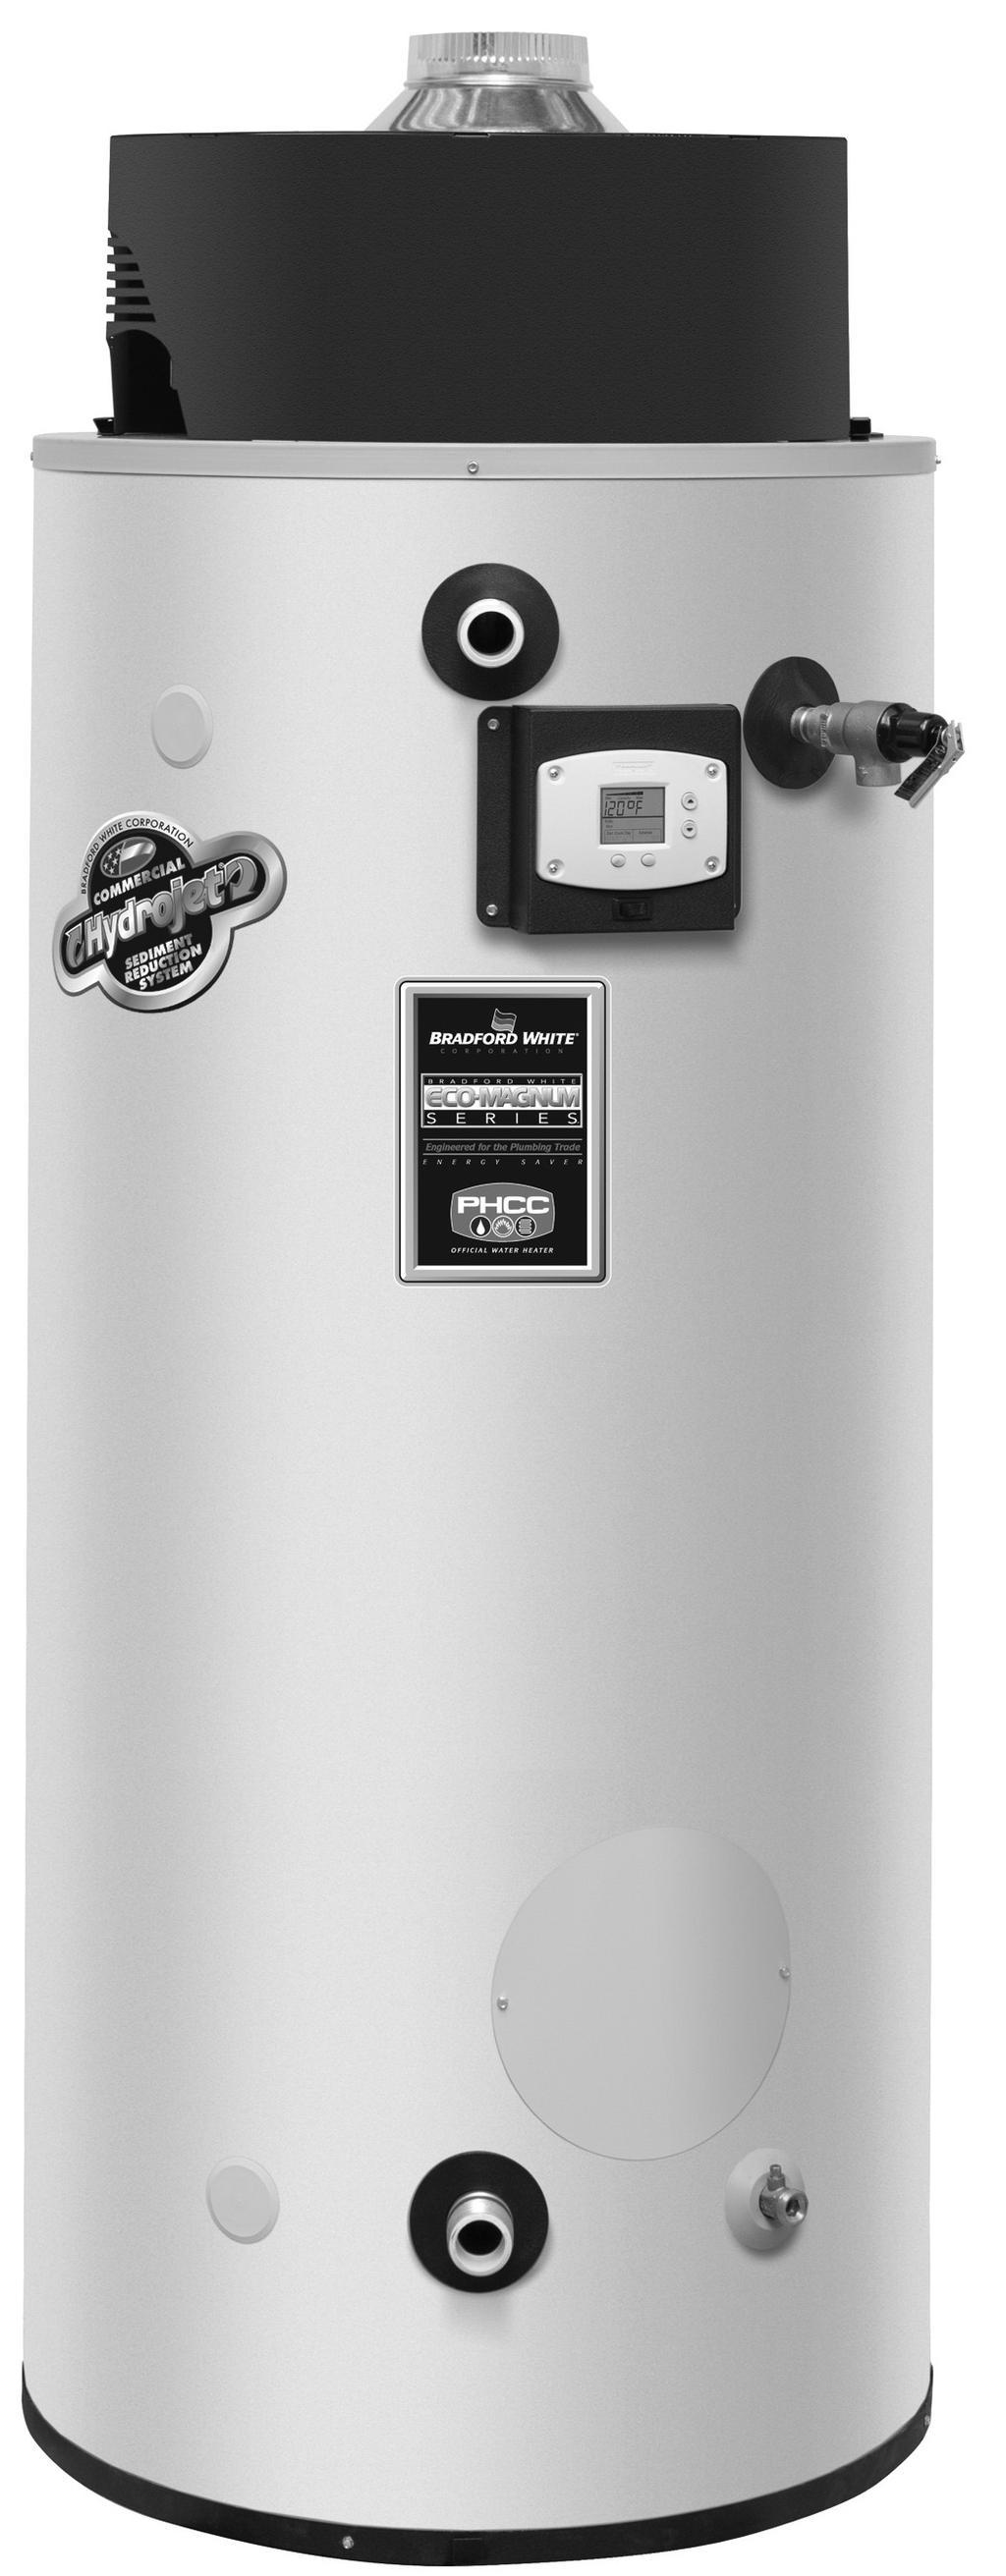 Ultra Low Ox Atmospheric Vent Water Heaters with Direct Spark Ignition SERVICE MAUAL Troubleshooting Guide and Instructions for Service (To be performed OL by qualified service